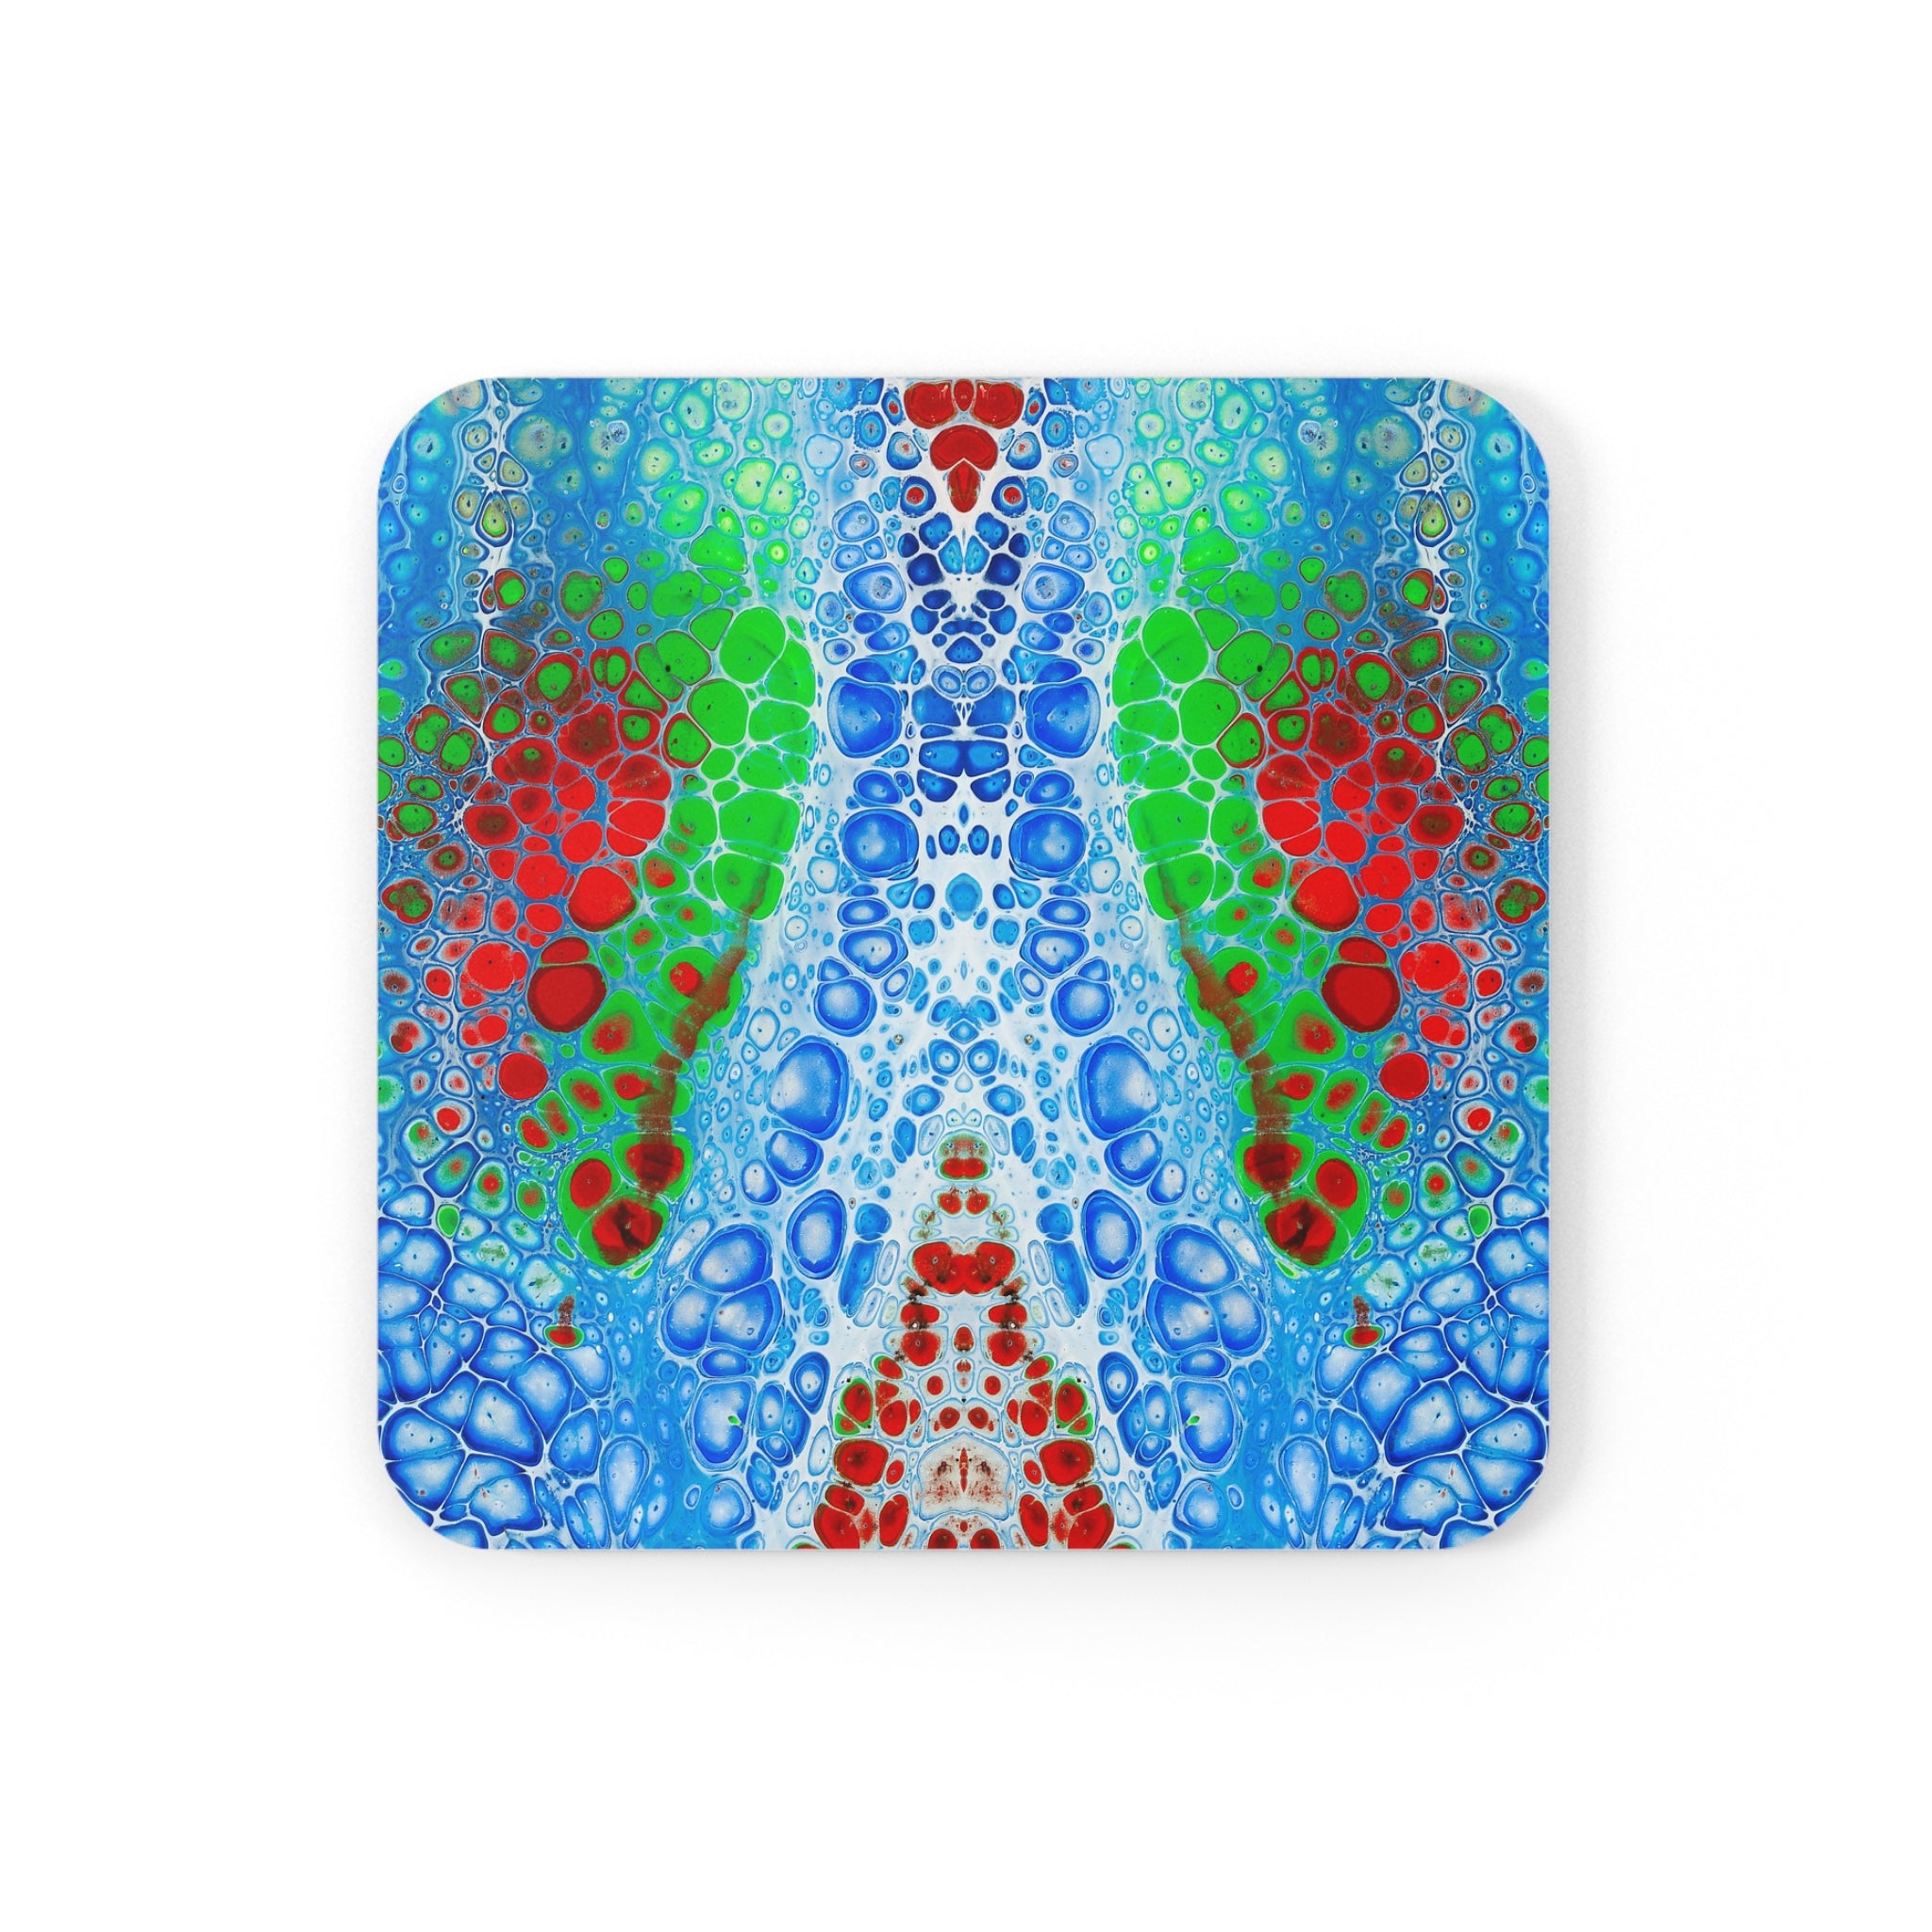 Cameron Creations - Fluid Bubbles - Stylish Coffee Coaster - Square Front